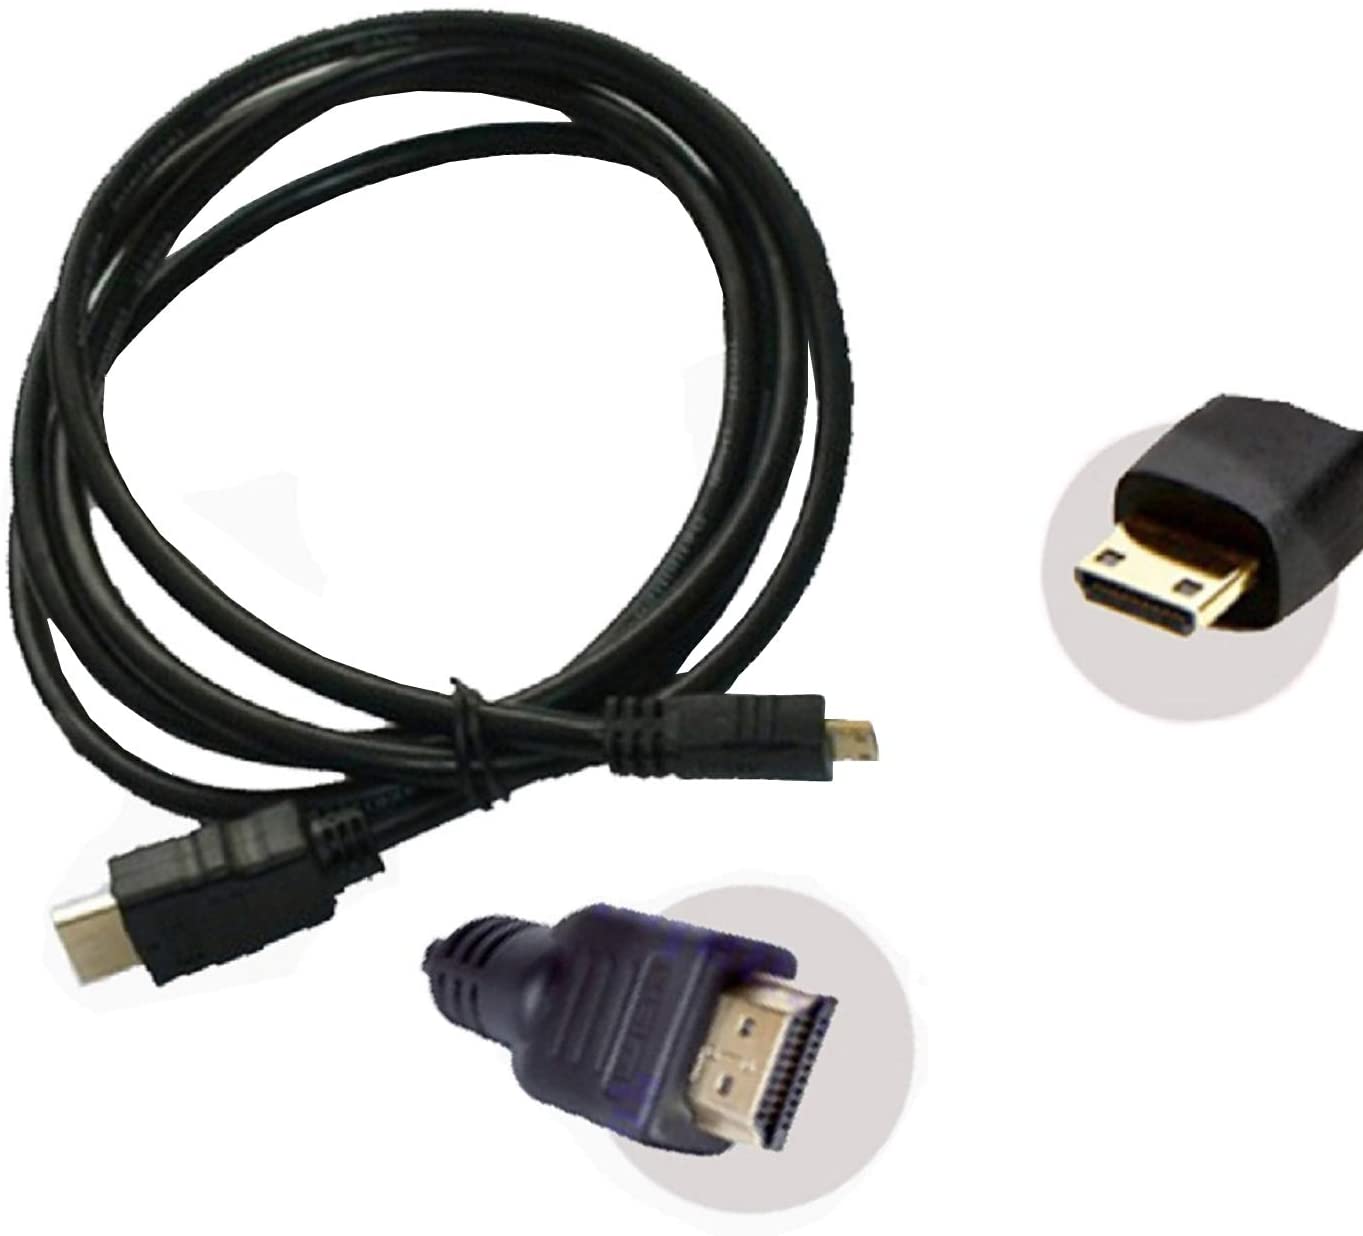 UPBRIGHT NEW HDMI to Mini HDMI C AV TV-Out Lead Cable Cord For Sony Alpha Digital SLR Camera,NEX-3 K/S K/B to HDTV,NEX-5 K/S K/B to HDTV,A330 10.2 MP Digital SLR Camera,A35 16.2 MP Digital SLR Camera, - image 1 of 5